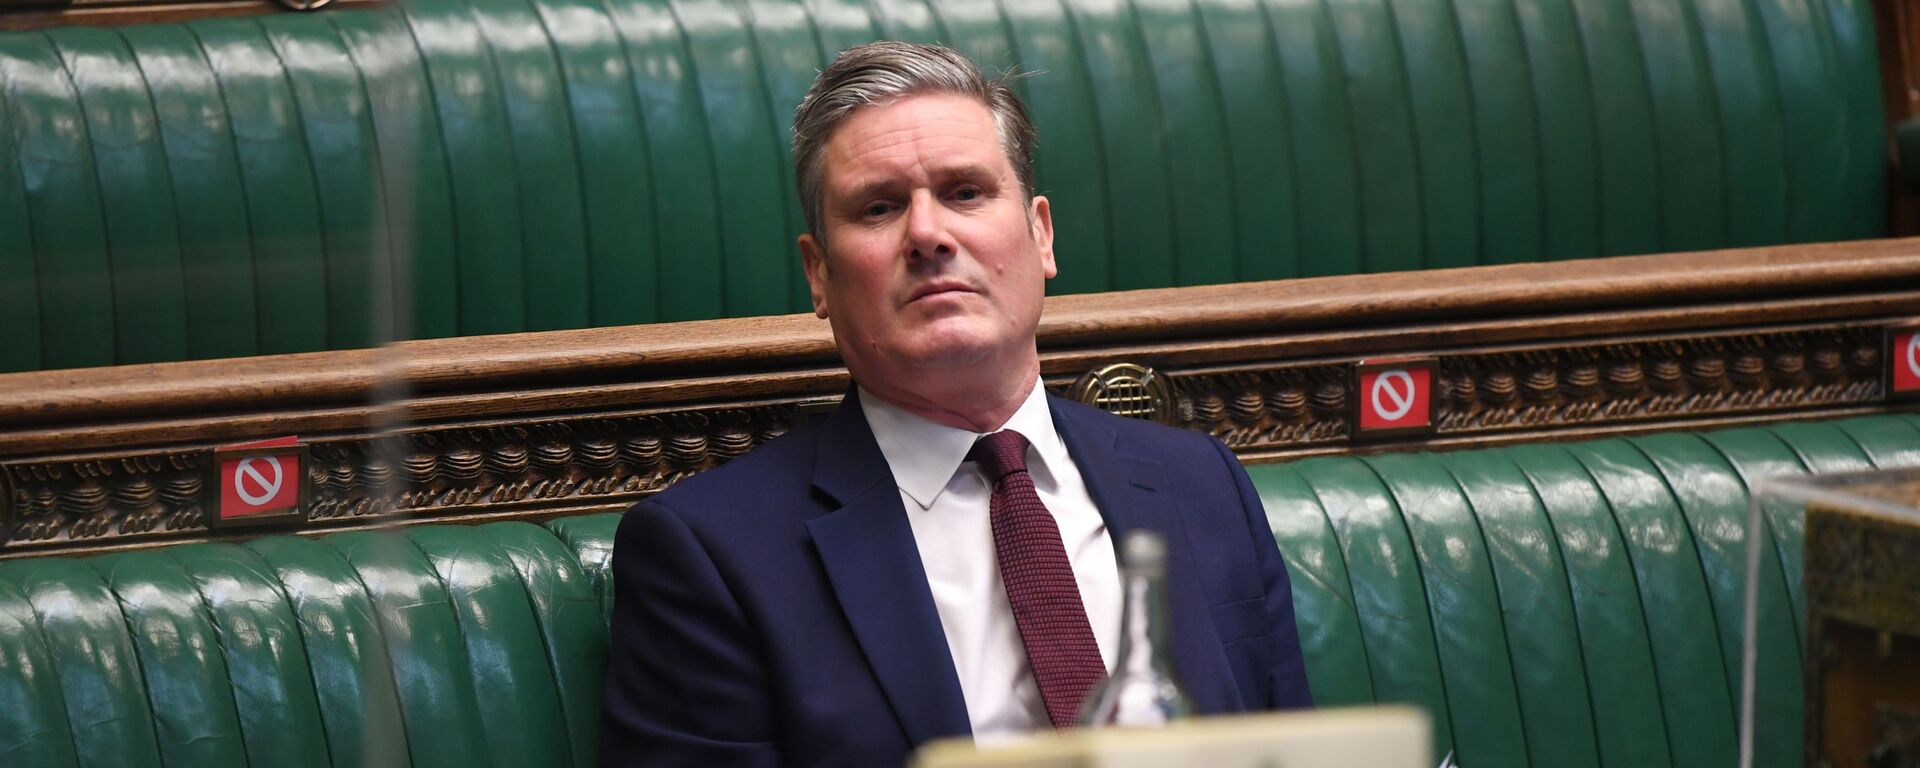 Britain's Labour Party leader, Keir Starmer attends a session in Parliament, in London - Sputnik International, 1920, 30.06.2021